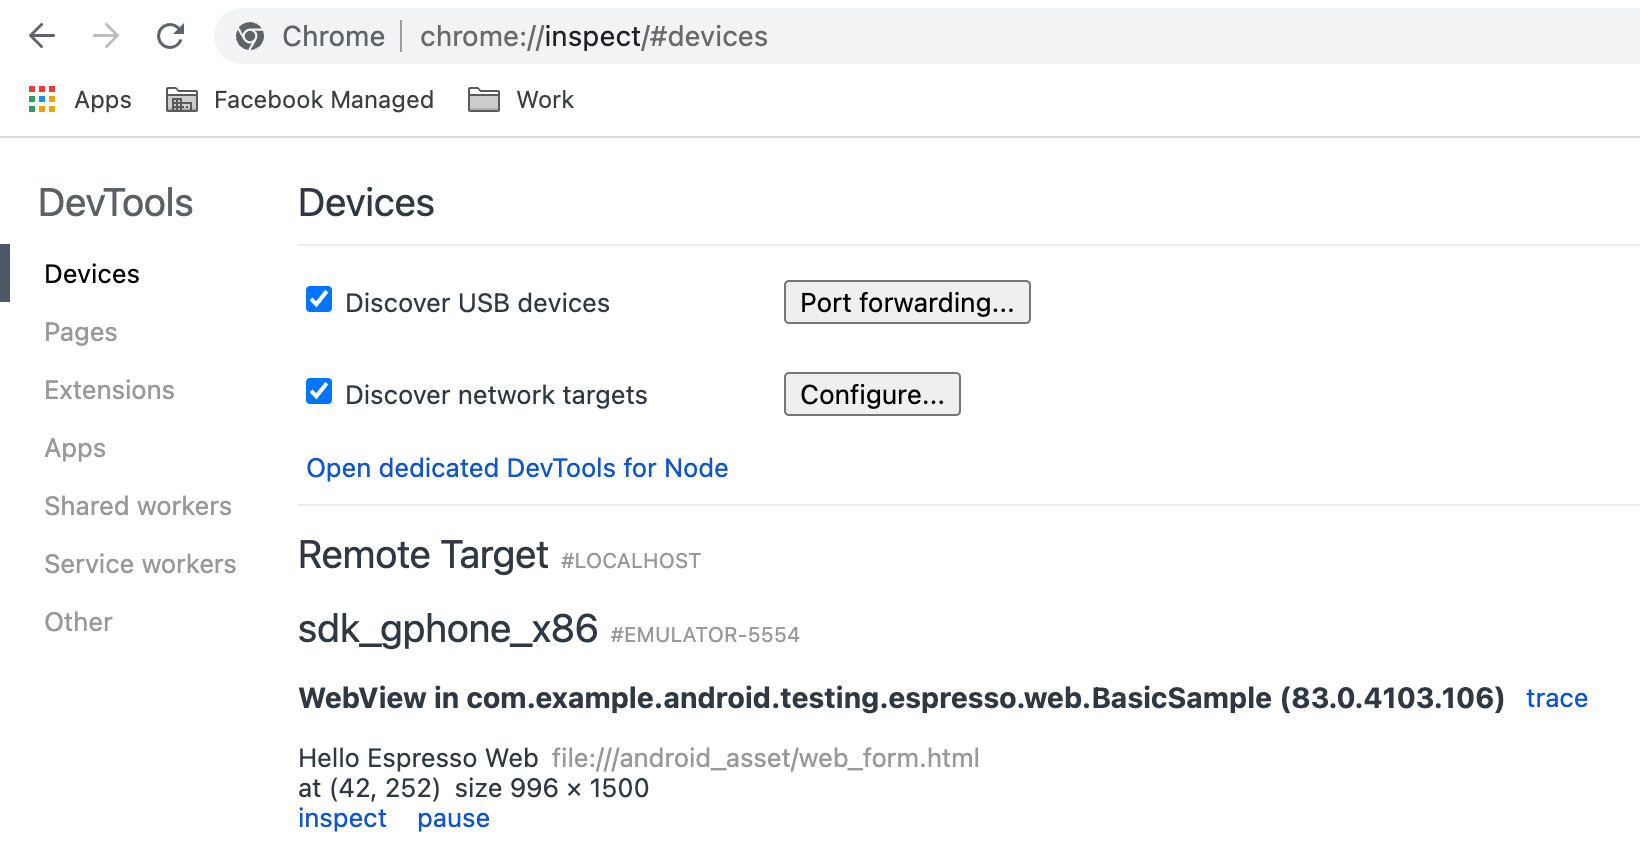 Chrome inspect devices screen